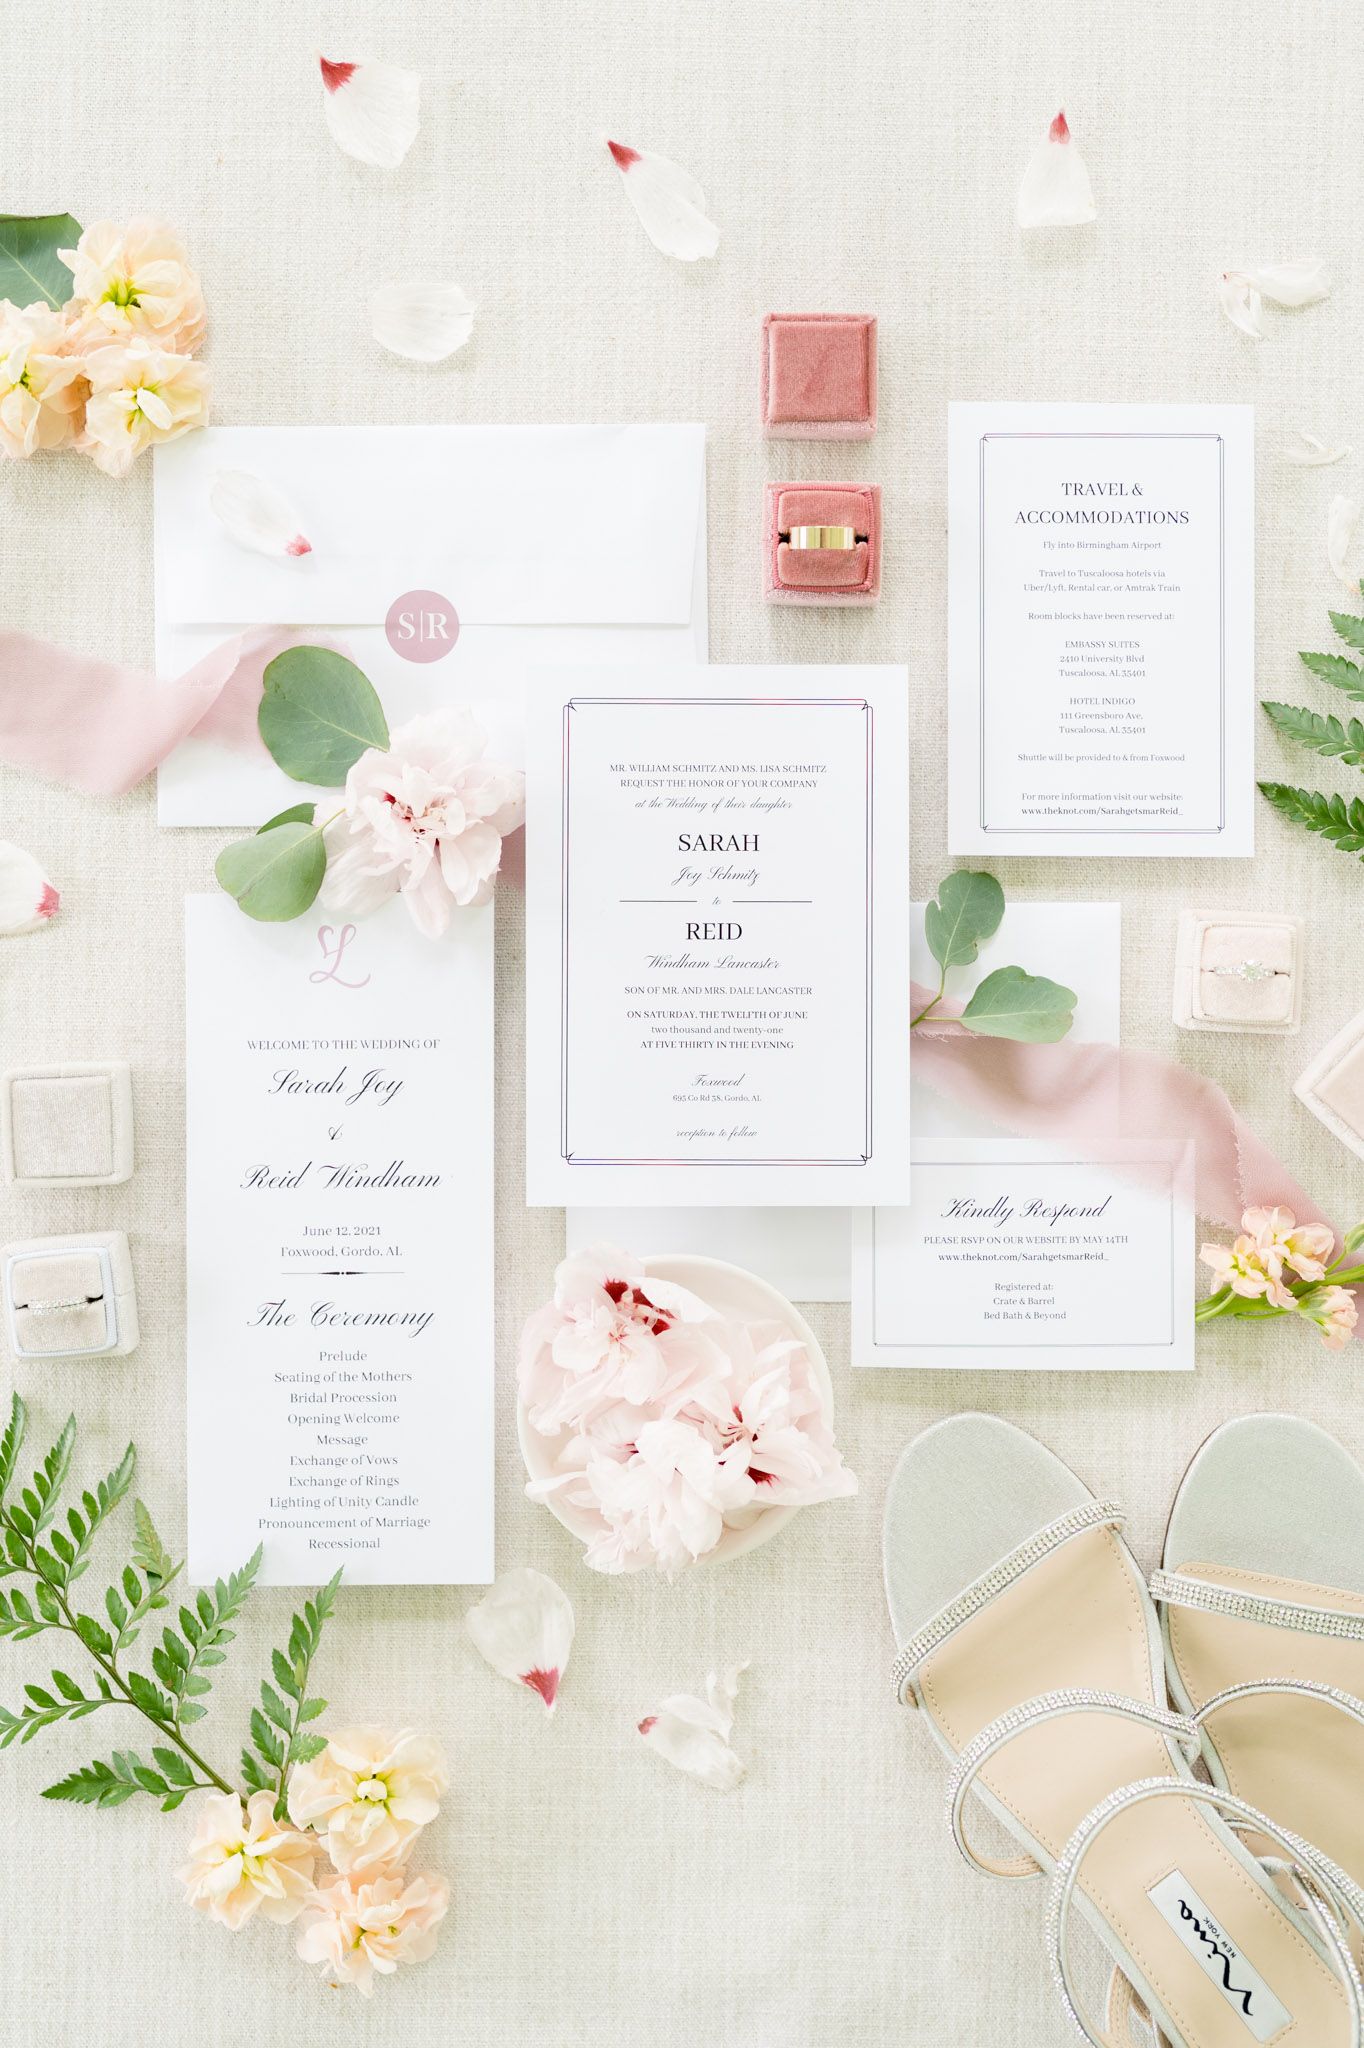 Wedding invitation suite and flowers sit on cream backdrop.